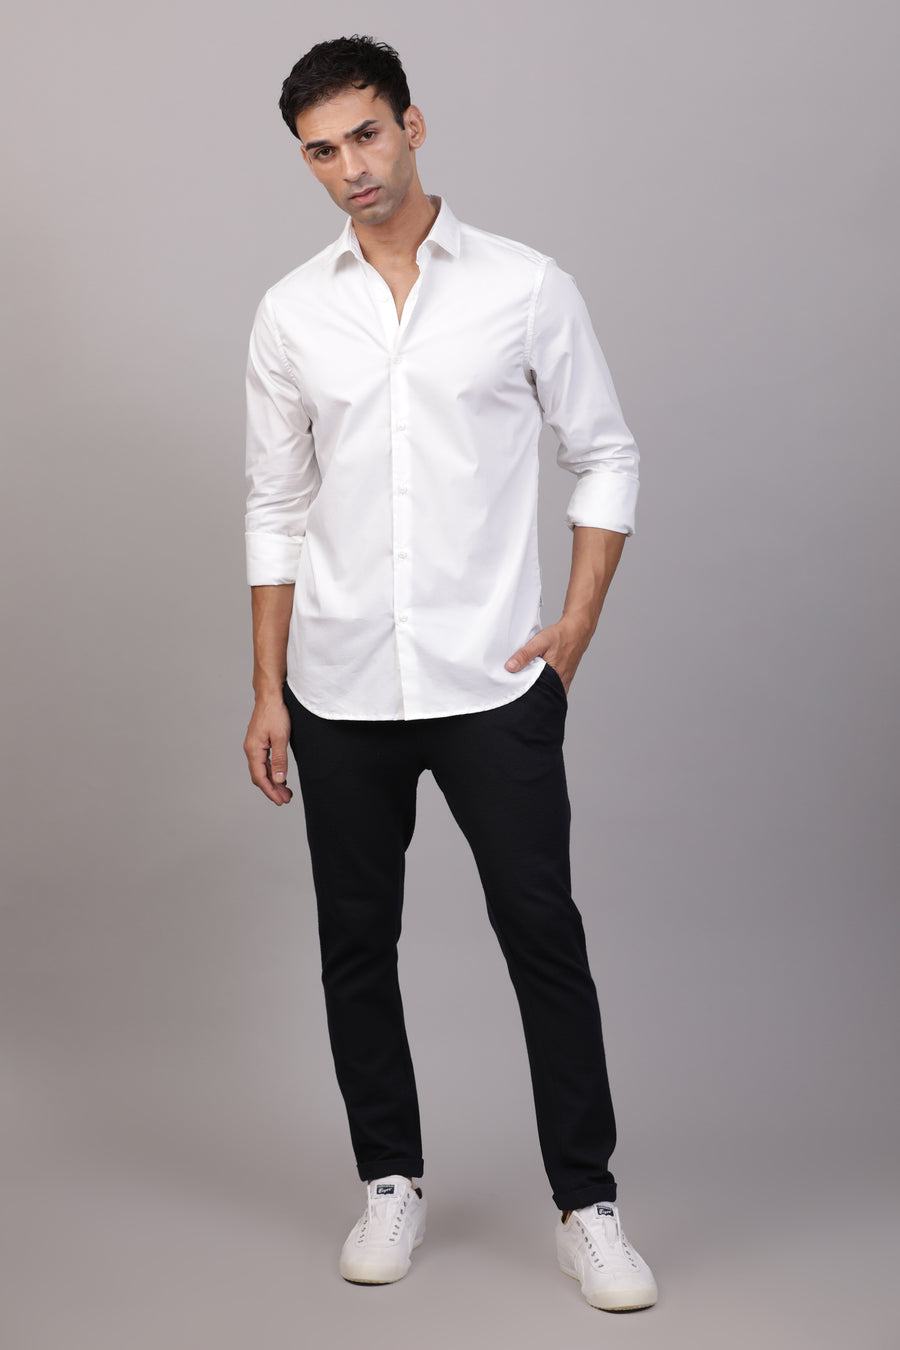 Victor - Satin Solid Shirt - White